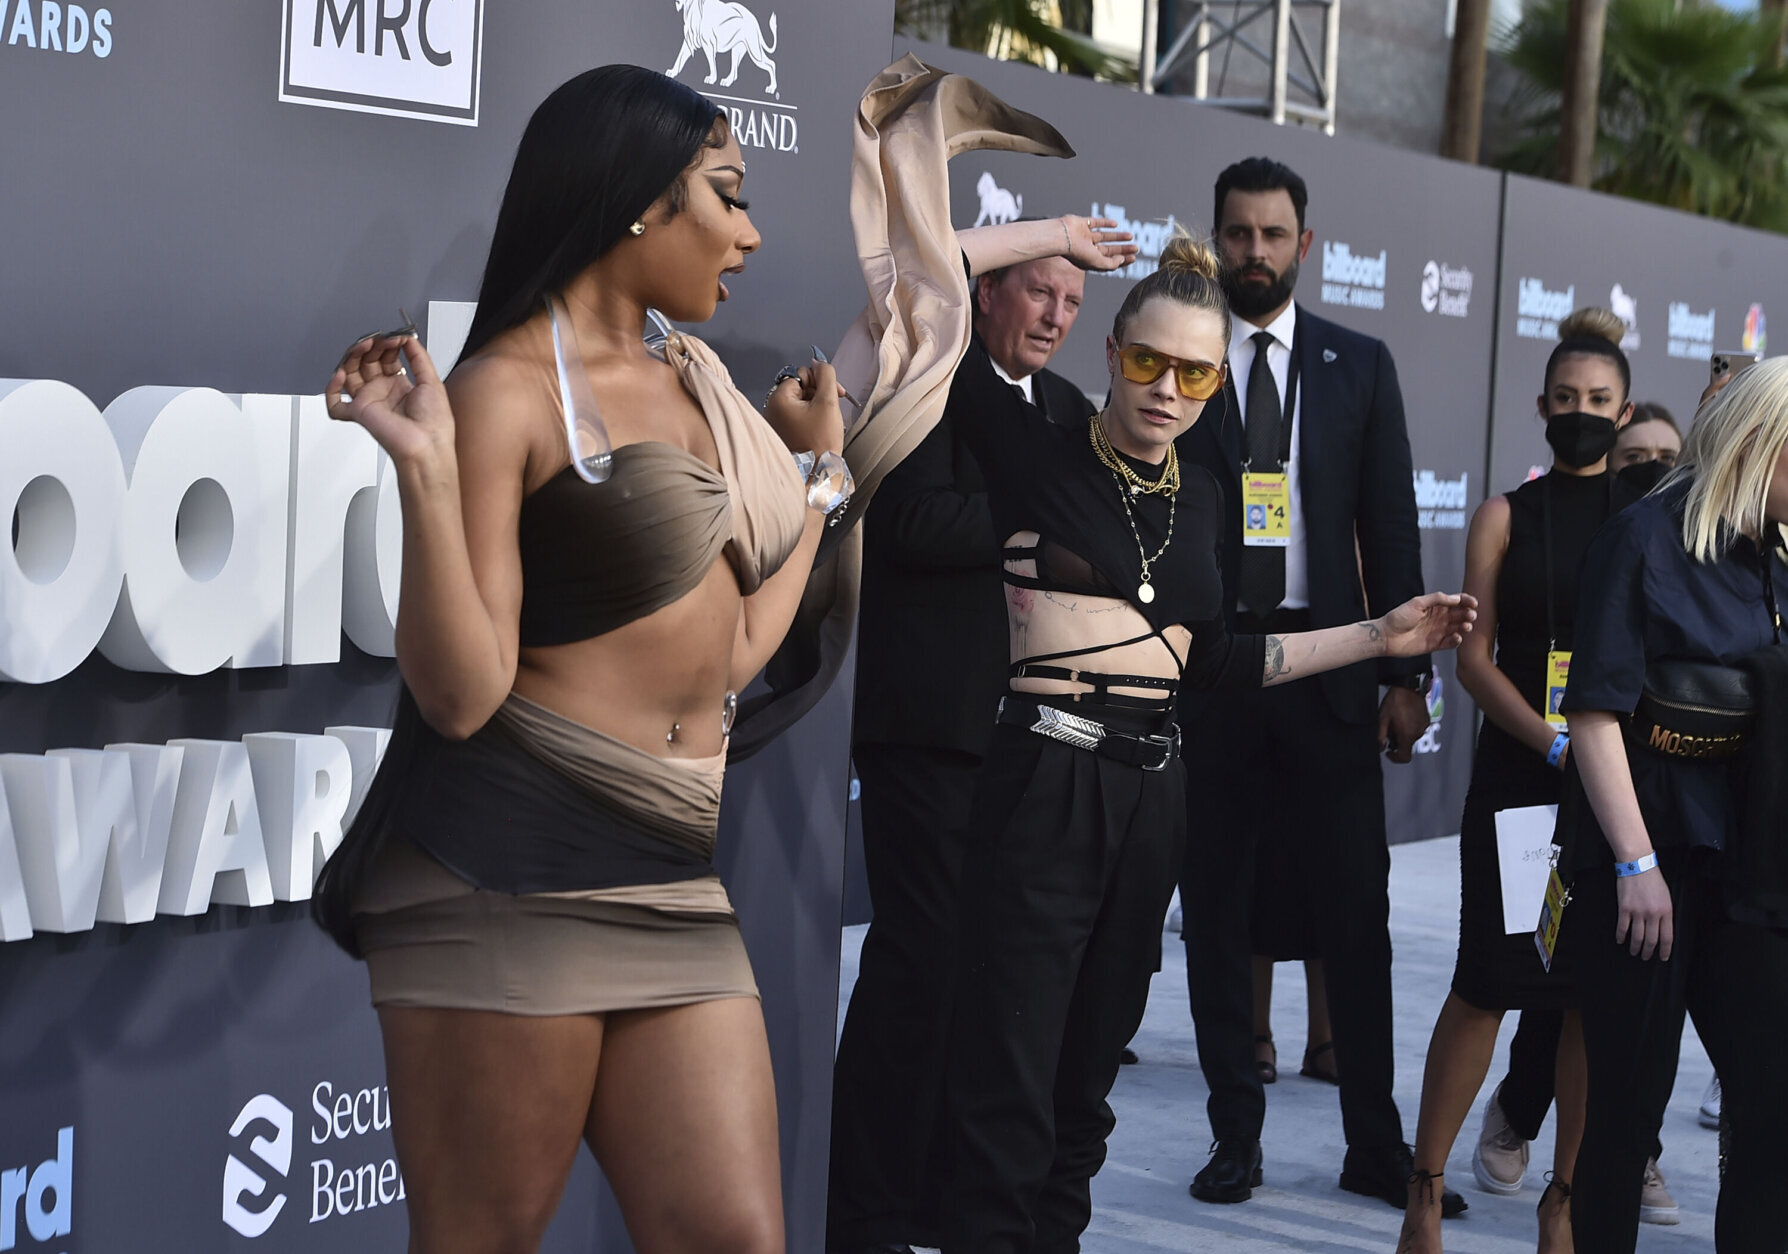 Megan Thee Stallion, left, and Cara Delevingne arrive at the Billboard Music Awards on Sunday, May 15, 2022, at the MGM Grand Garden Arena in Las Vegas. (Photo by Jordan Strauss/Invision/AP)